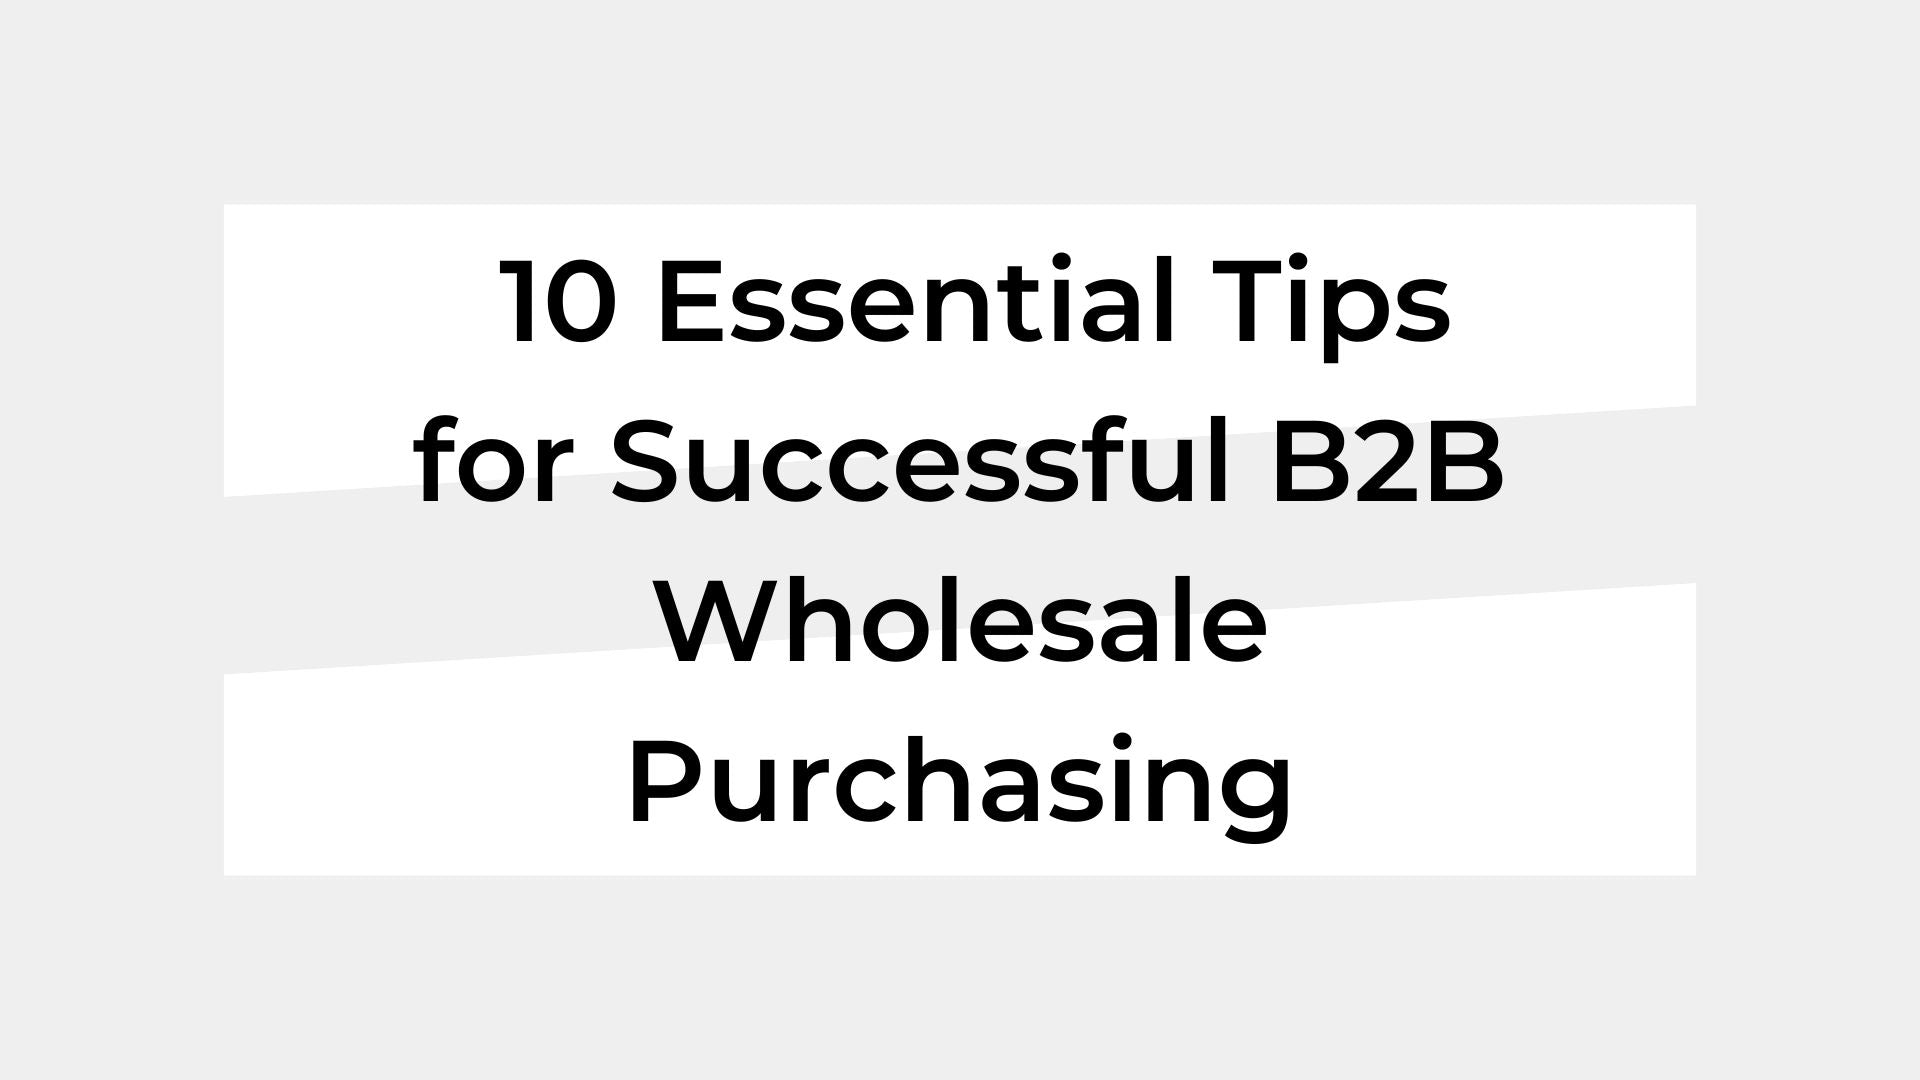 10 Essential Tips for Successful B2B Wholesale Purchasing